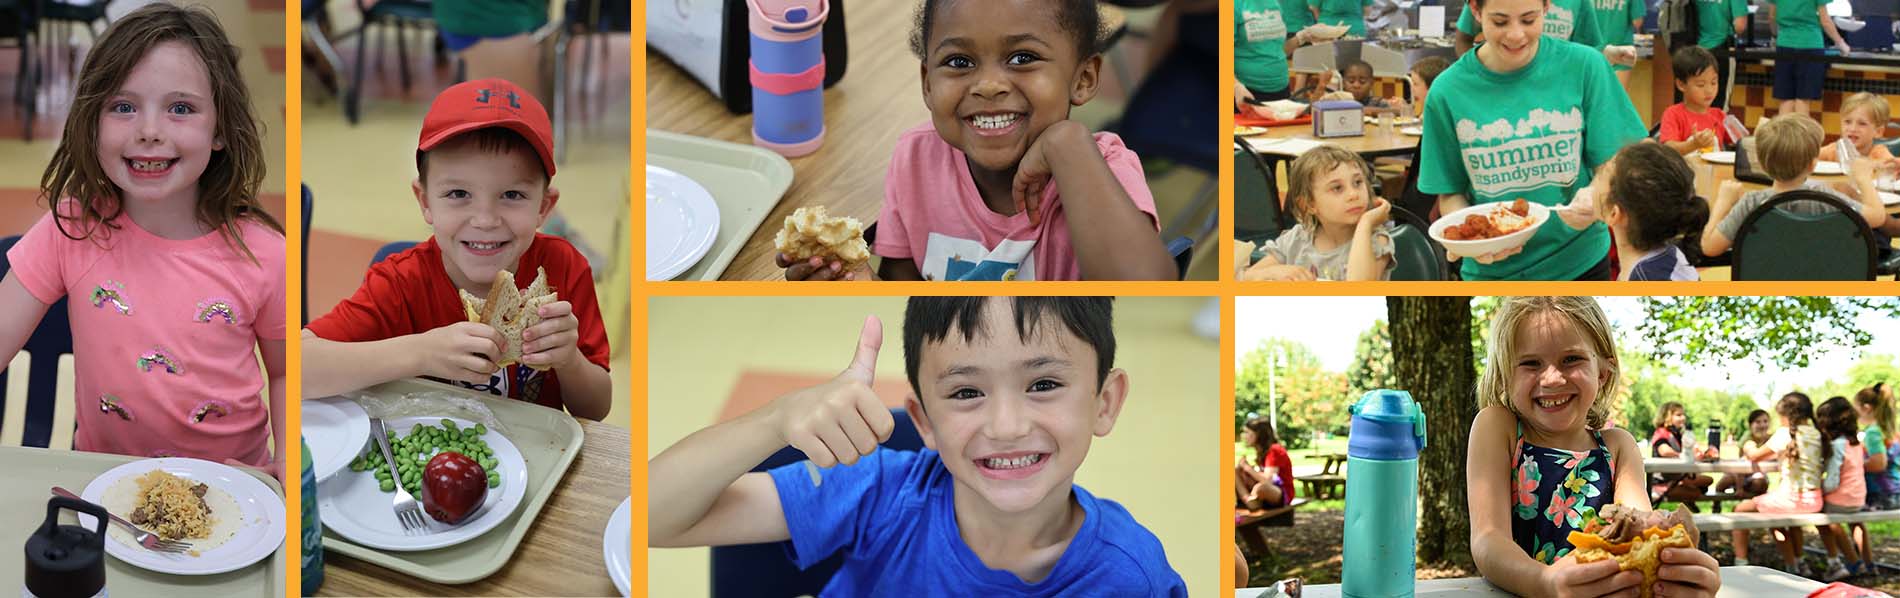 collage of kids enjoying their lunch and snacks